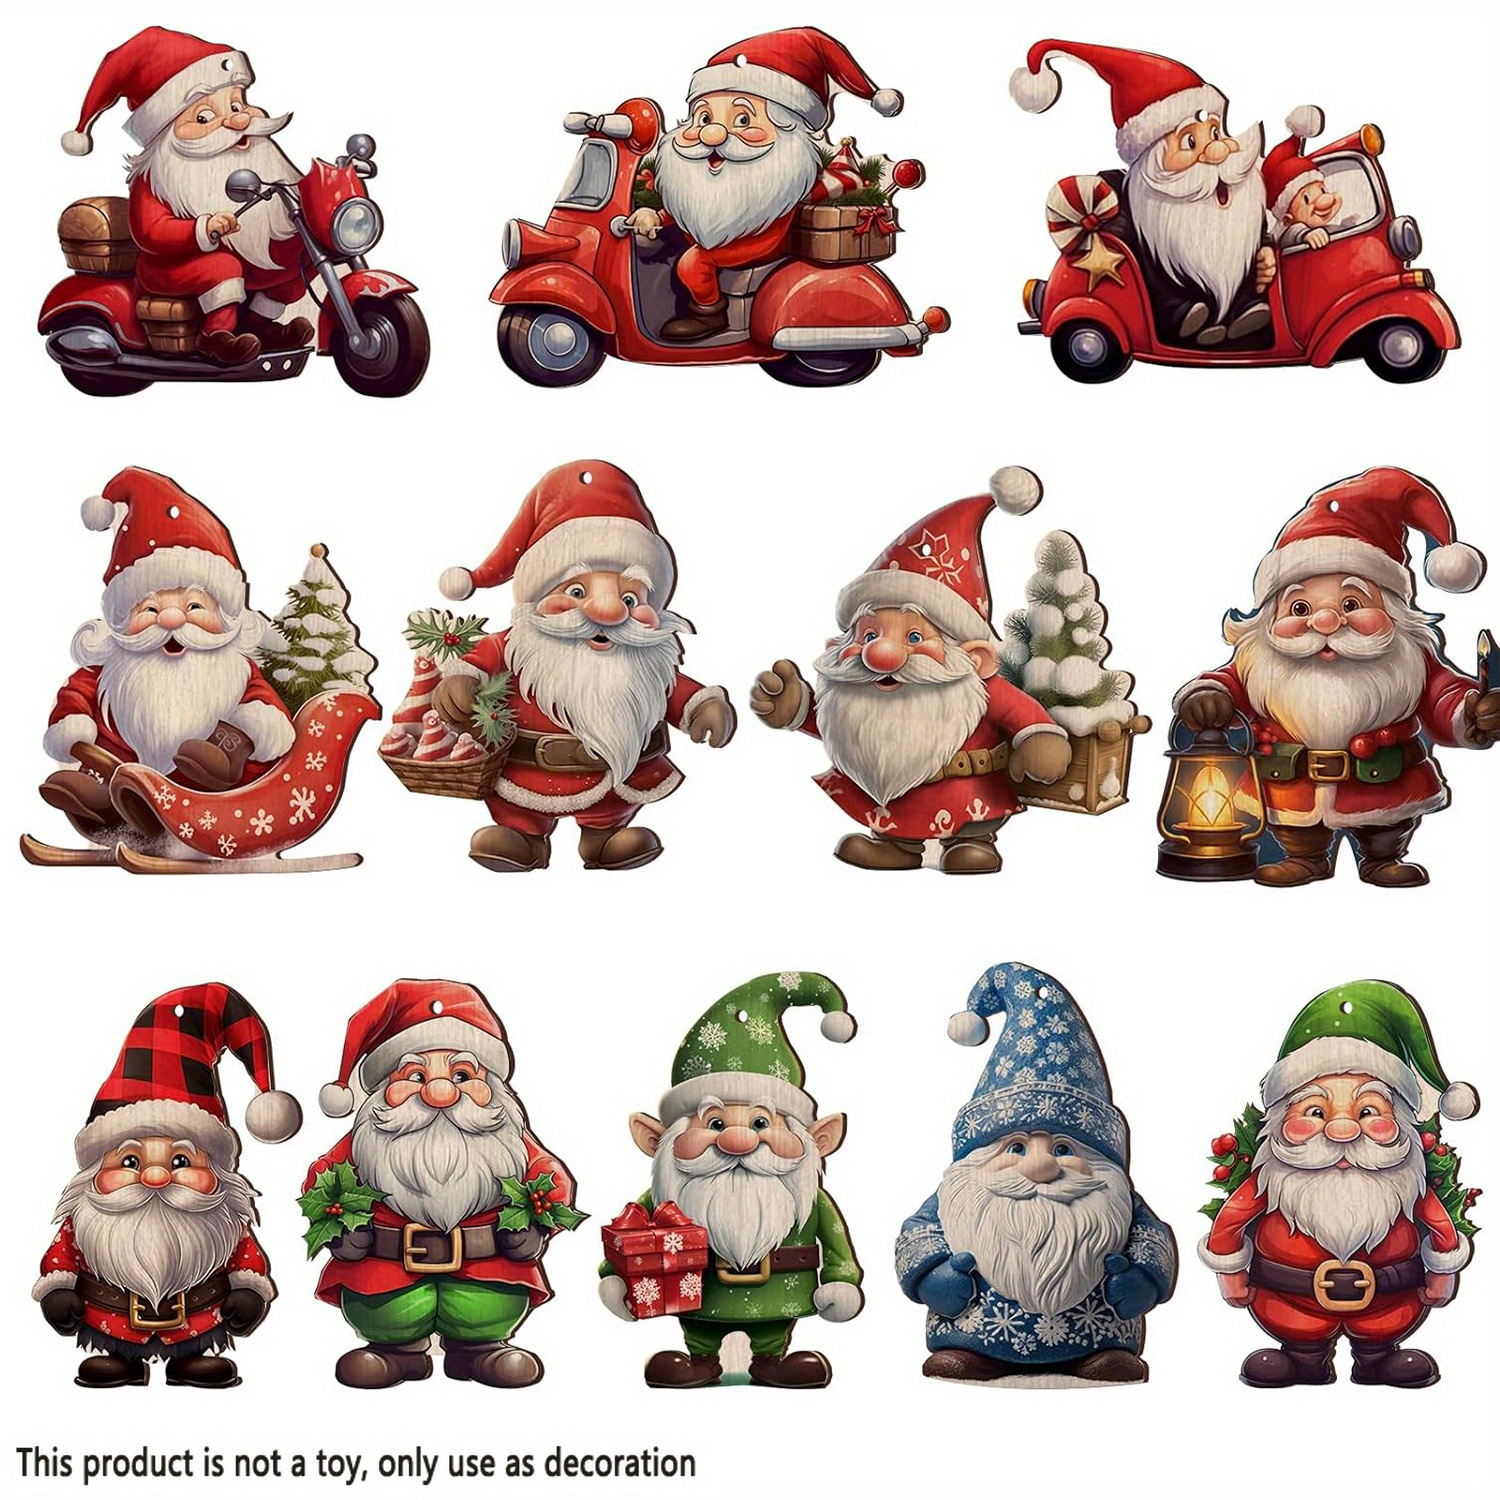 

24 Pcs Wooden Christmas Santa Claus Hanging Ornaments - Perfect For Holiday Decorations, Garden, Tree, Party, And Yard